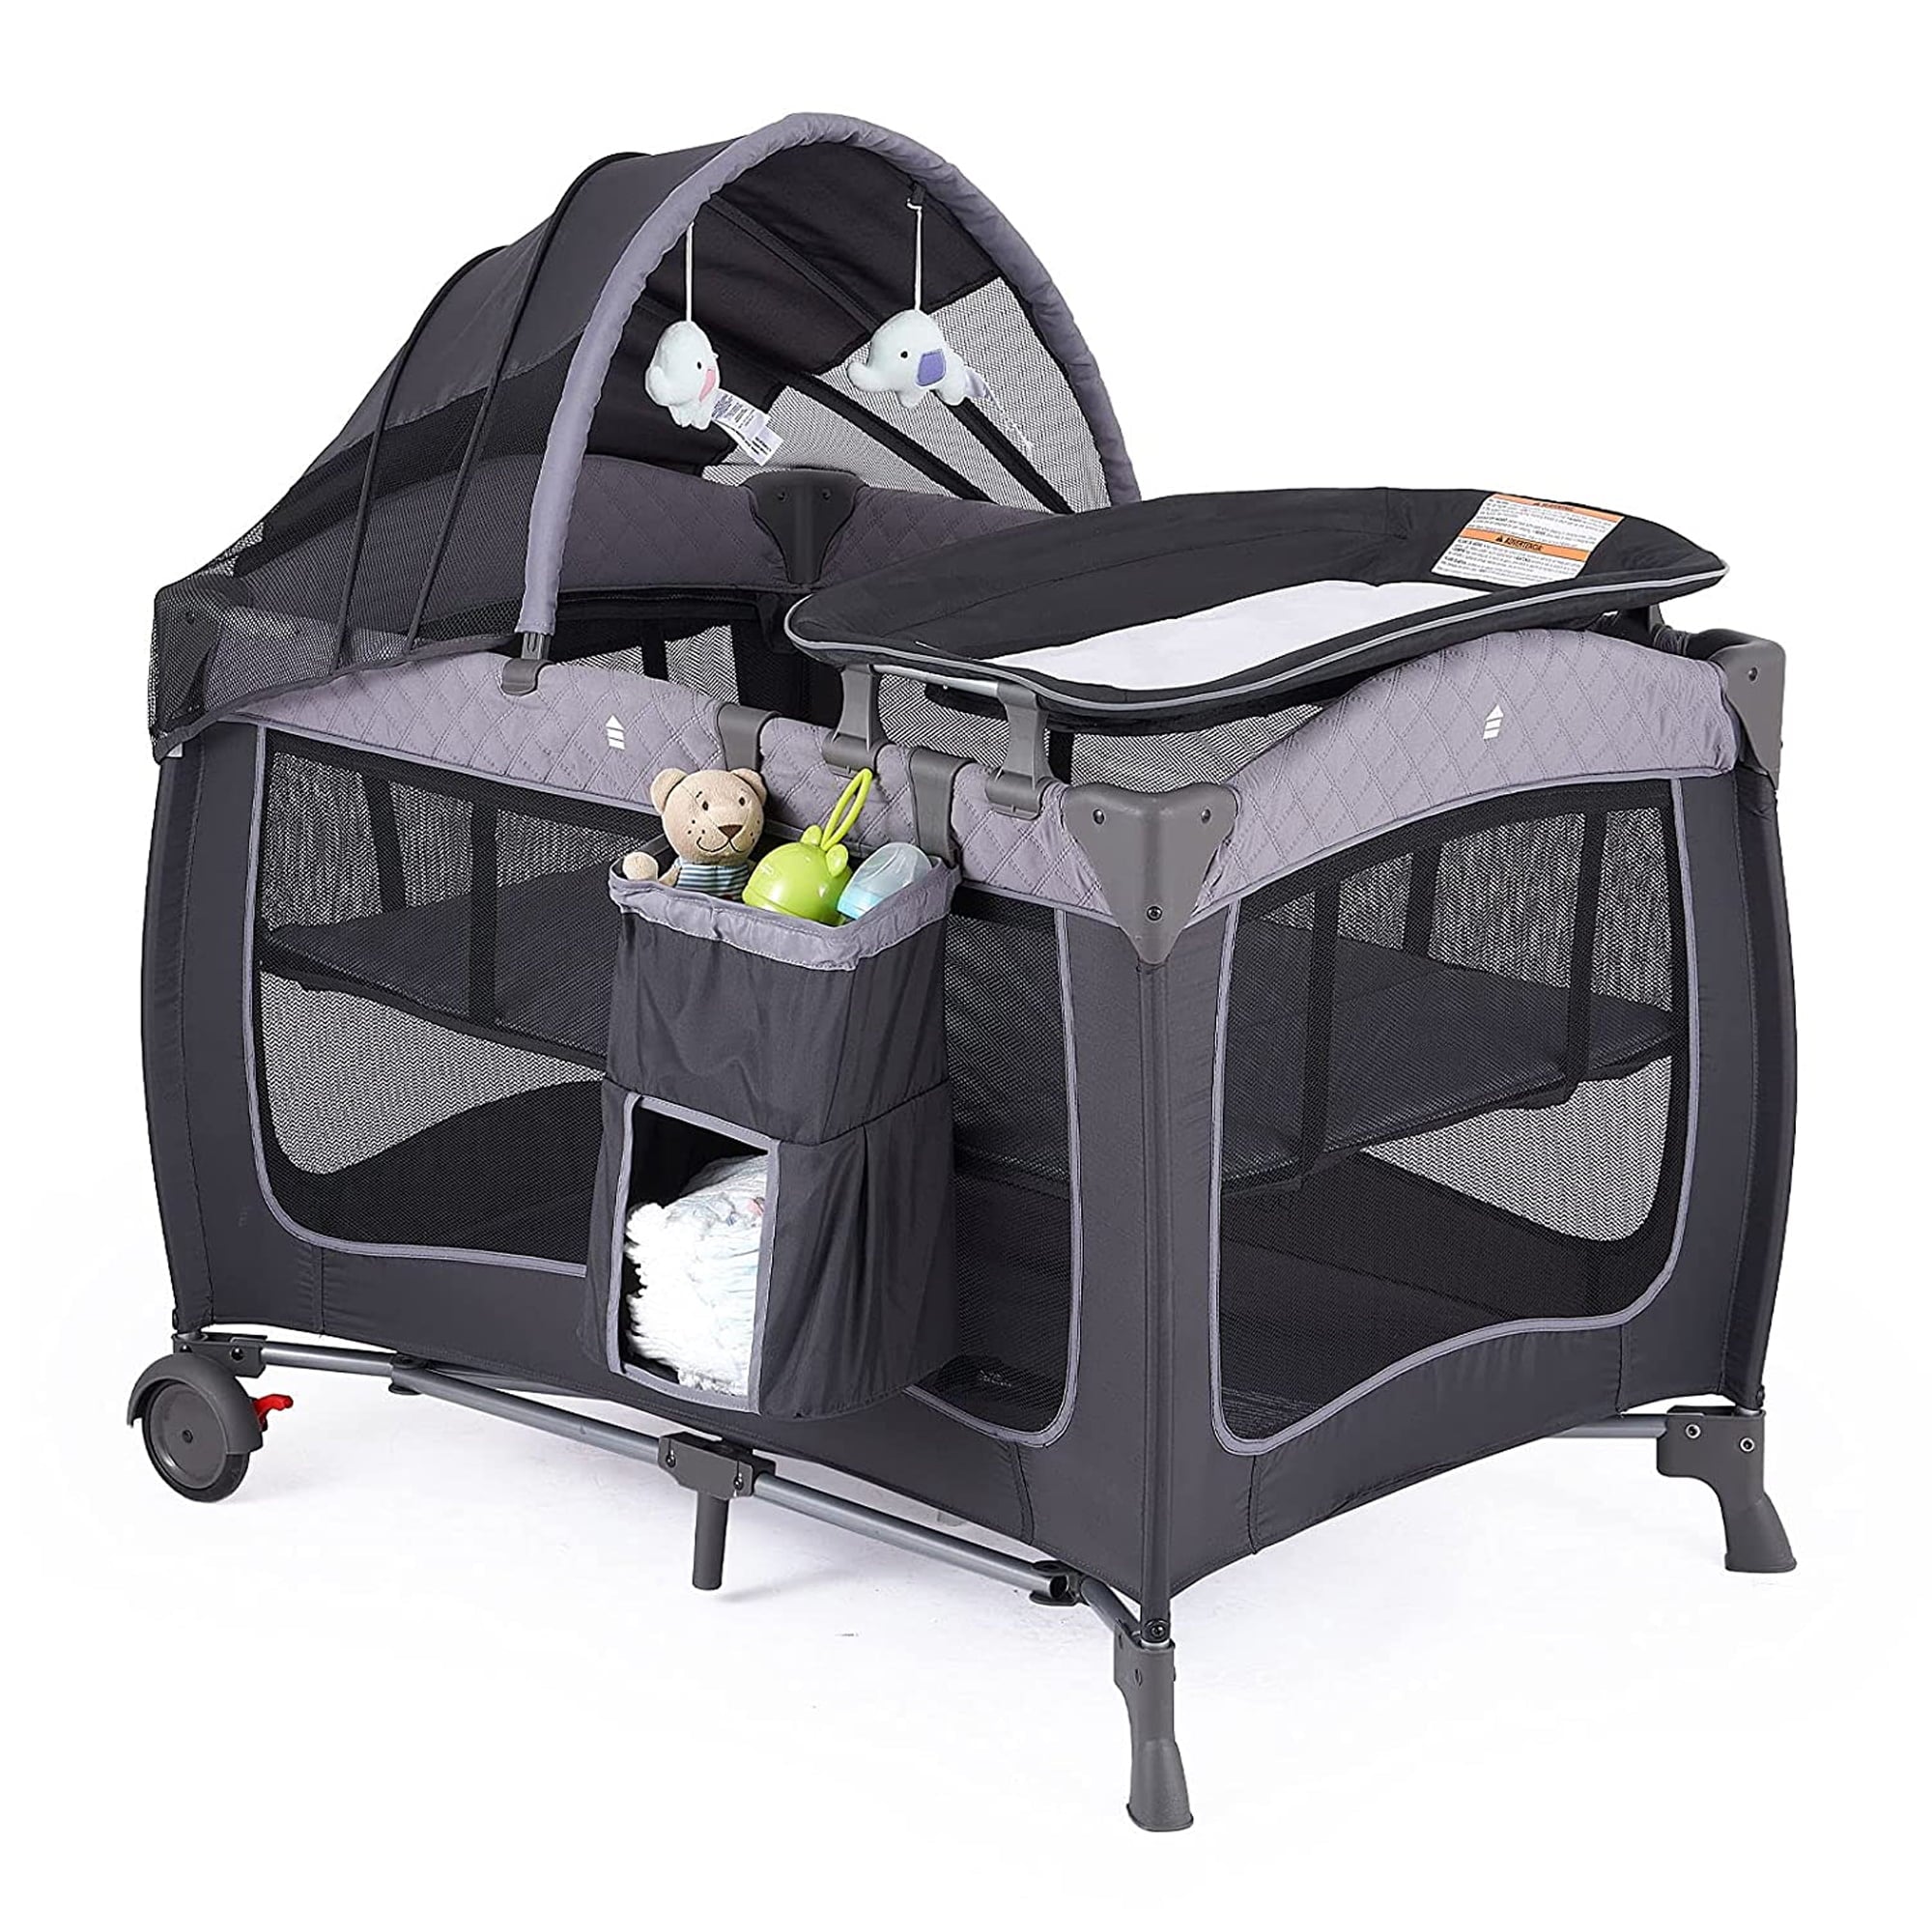 Portable Baby Play Yard With Wheels, Canopy, And Changing Table